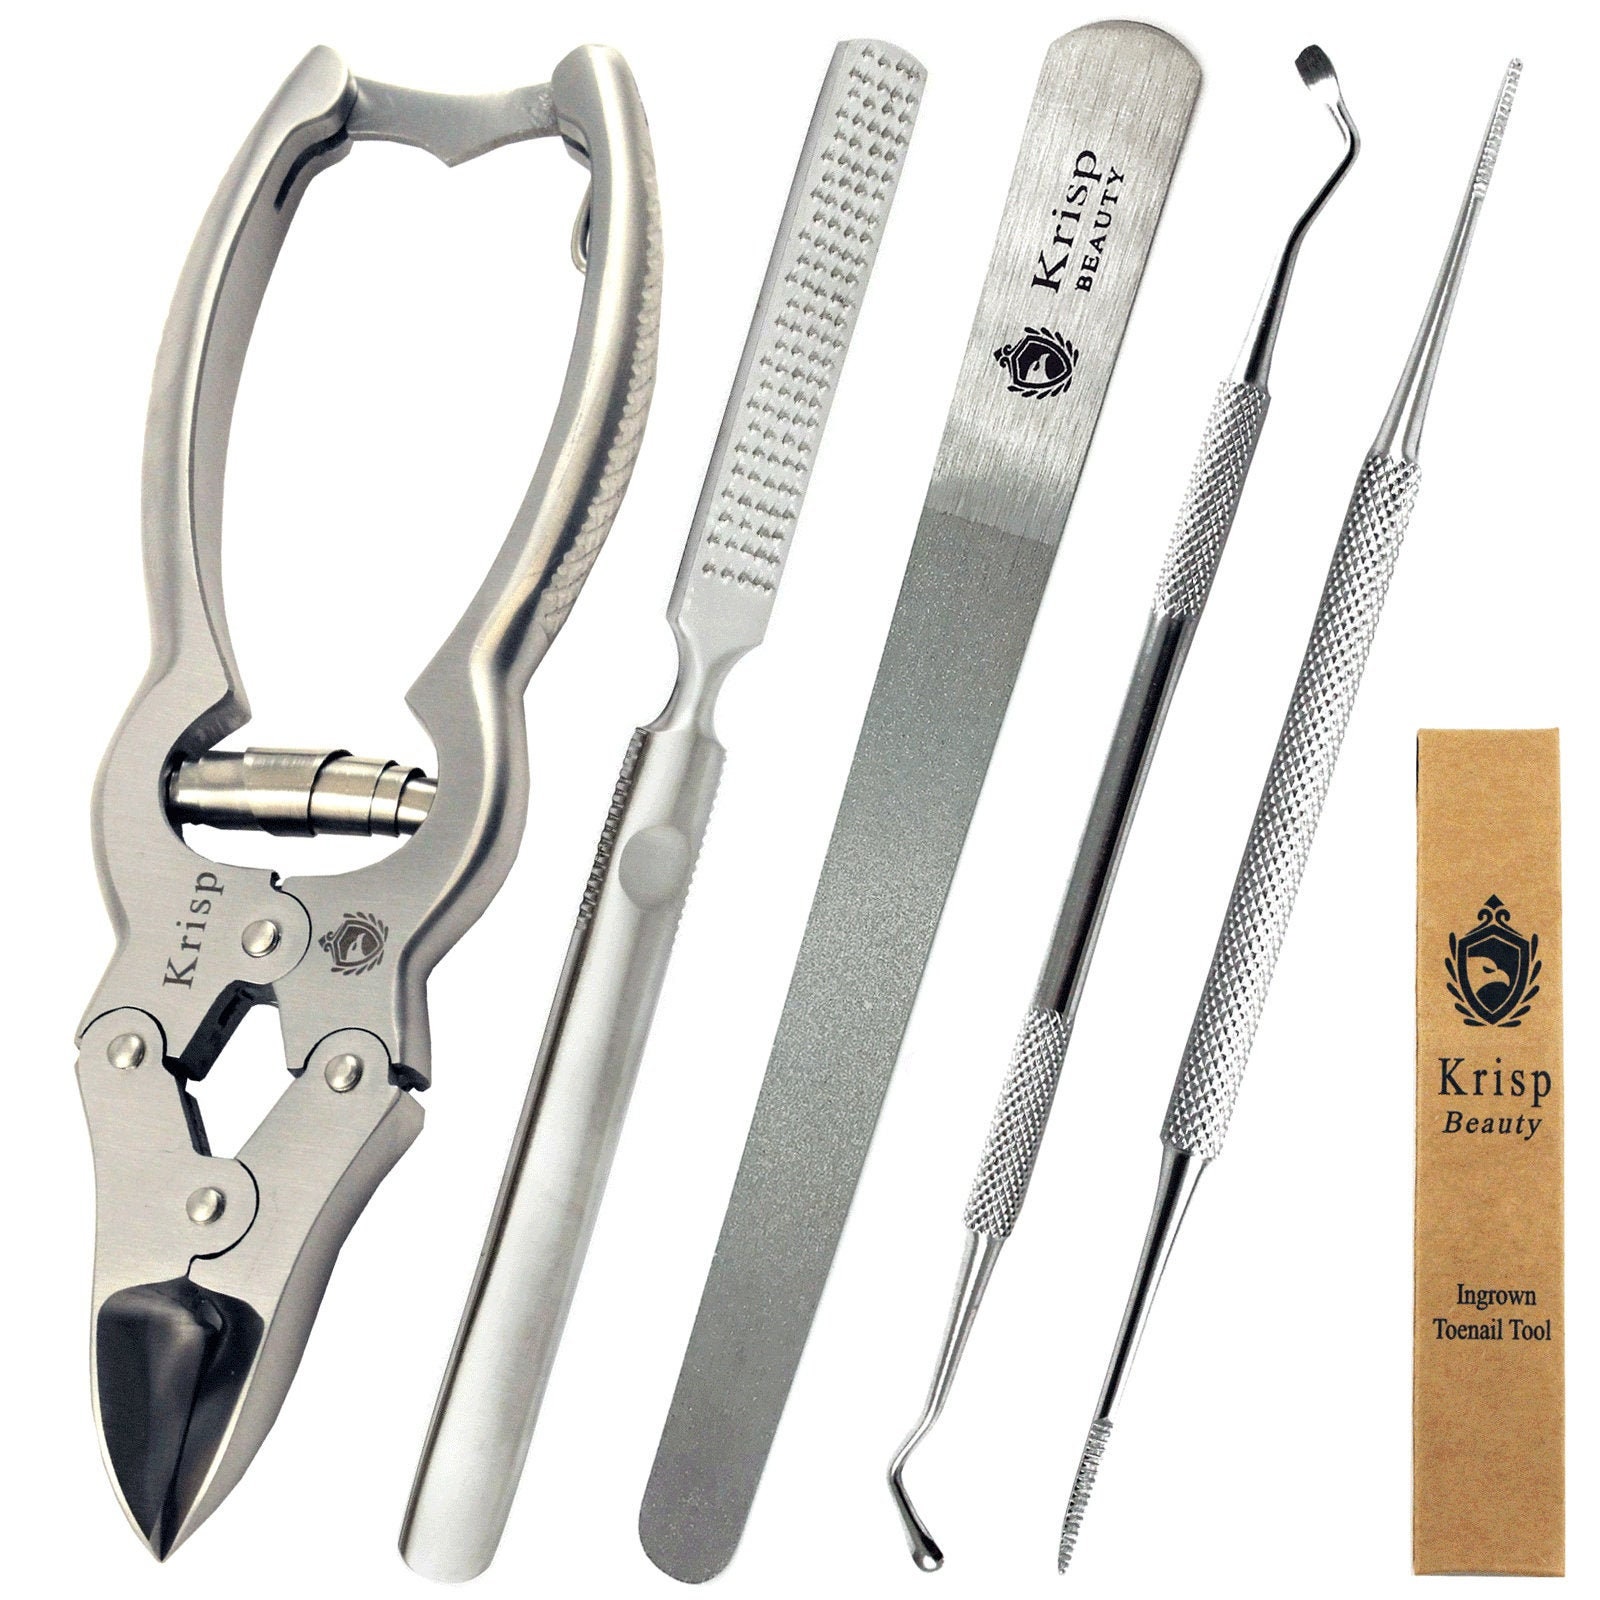 Long Handled Toenail Clippers Embroidery Scissors Nail Cutter